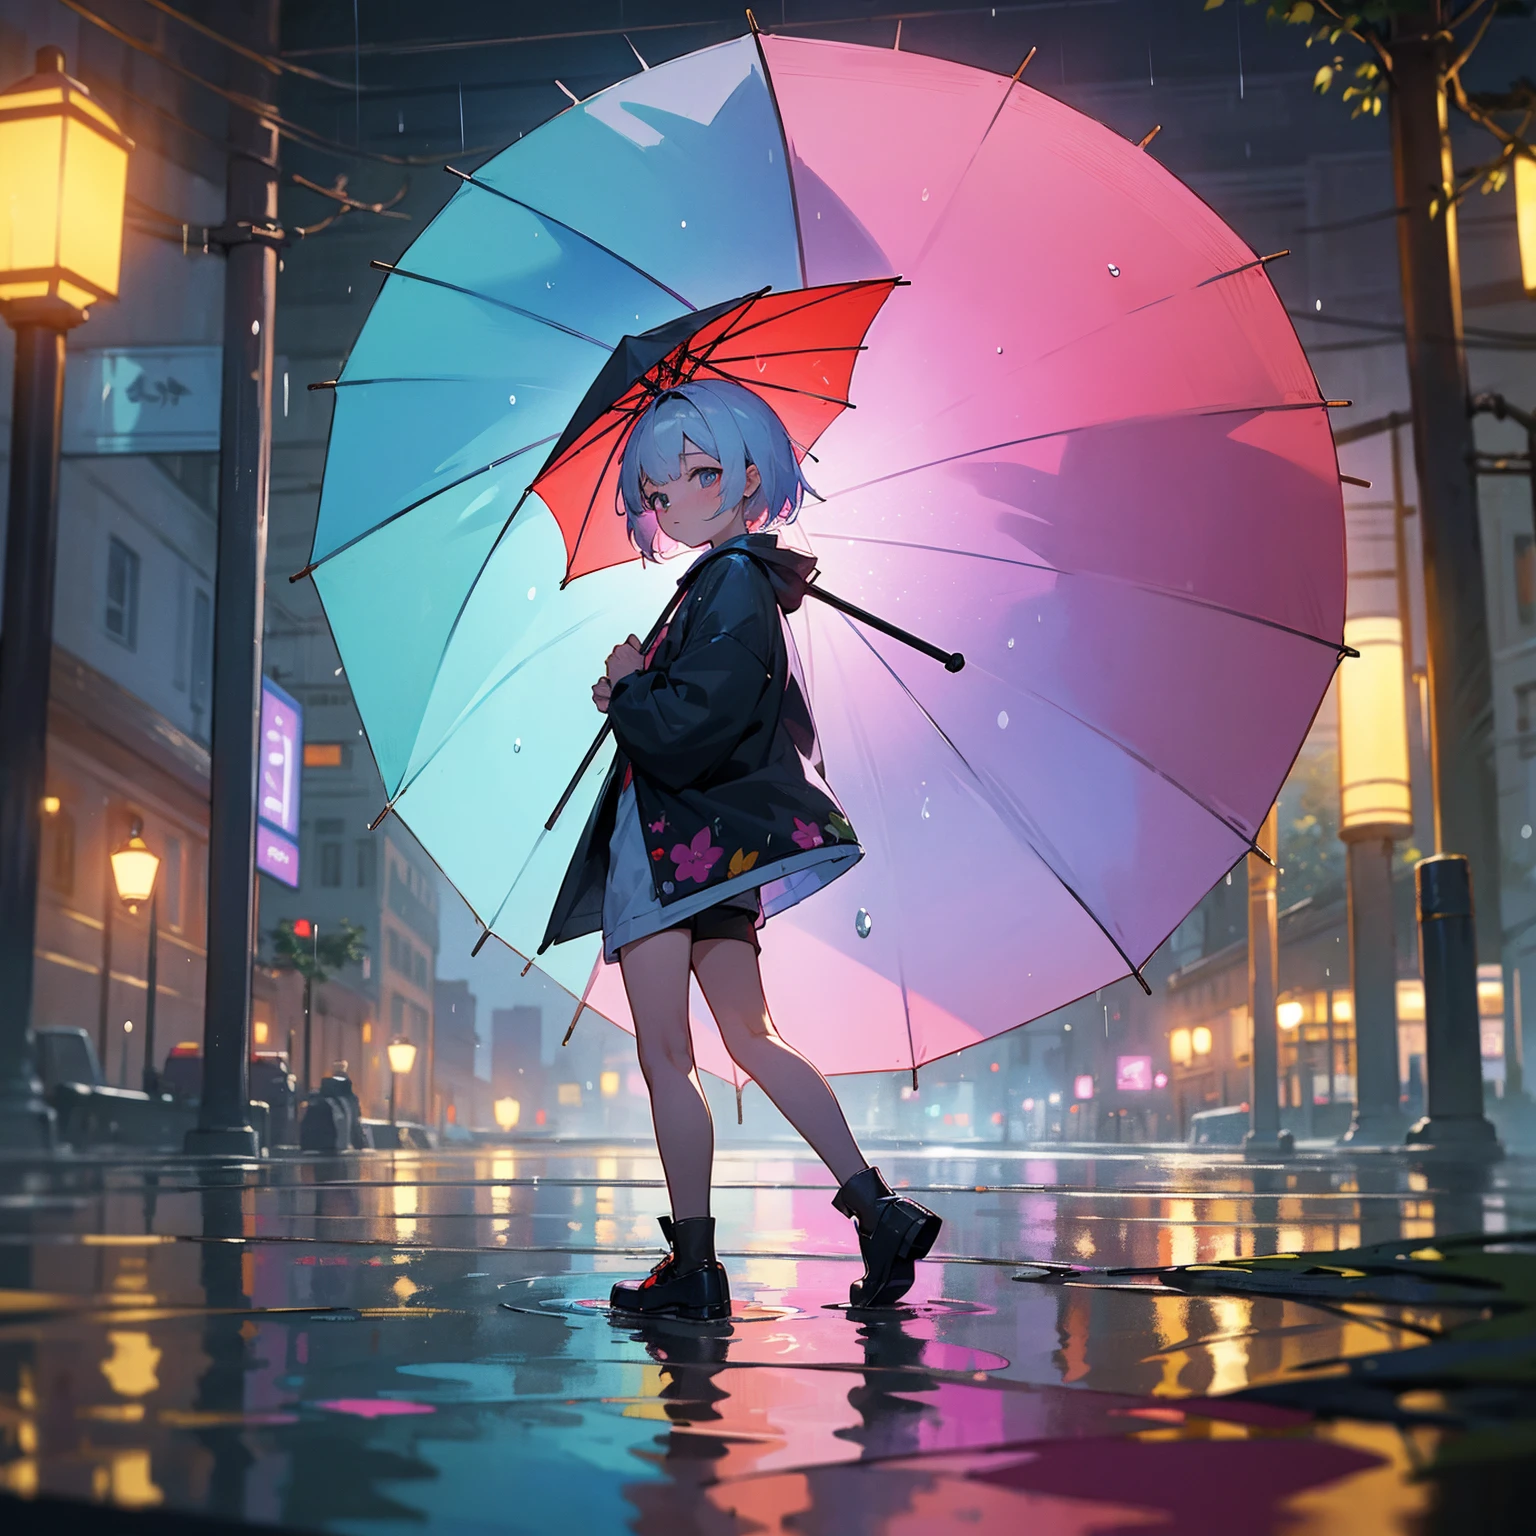 (best quality,4k,8k,highres,masterpiece:1.2),ultra-detailed,realistic, HDR,UHD,studio lighting,ultra-fine painting,sharp focus,physically-based rendering,extreme detail description,professional,vivid colors,bokeh,anime,landscape,a little boy wearing a raincoat, wading through a rain-soaked city street, holding an umbrella with a cute cartoon character print, surrounded by colorful, vibrant umbrellas carried by other people passing by, with the raindrops glistening in the light, creating a mesmerizing atmosphere.